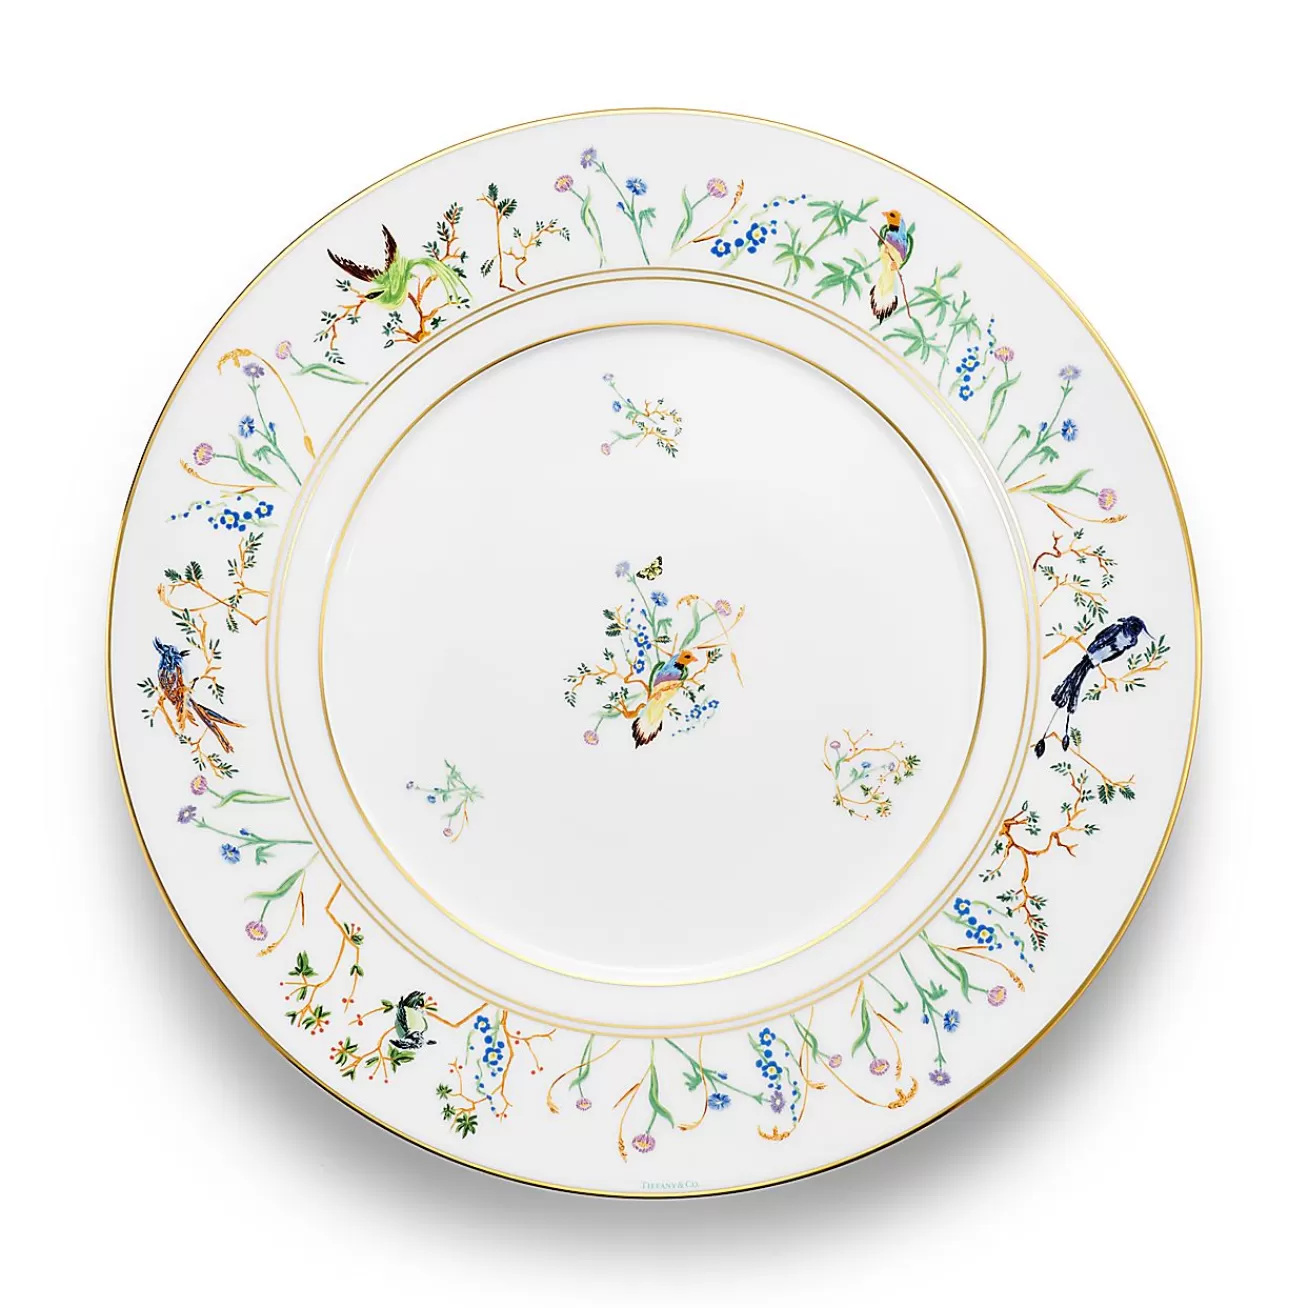 Tiffany & Co. Tiffany Jardin Charger Plate in Porcelain | ^ The Home | Housewarming Gifts